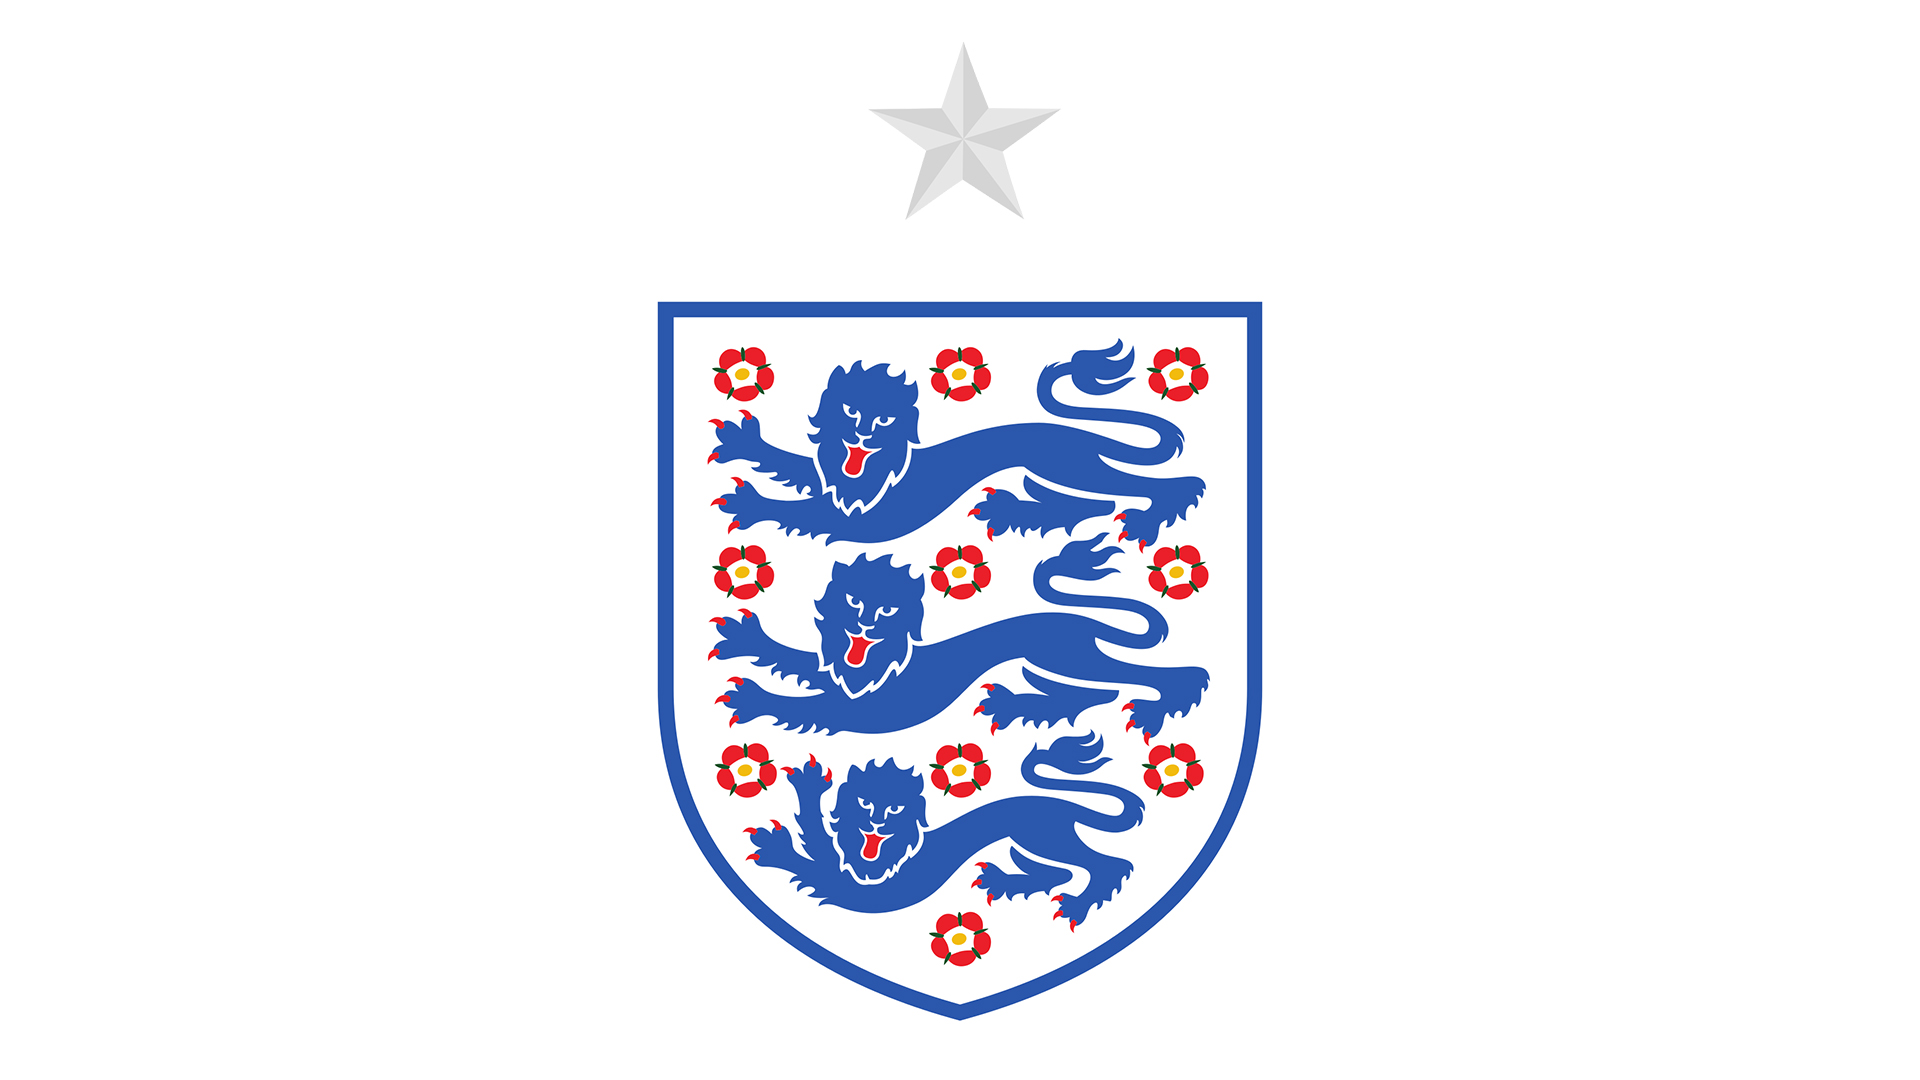 England's football shirt bearing the Three Lions badge and a silver star